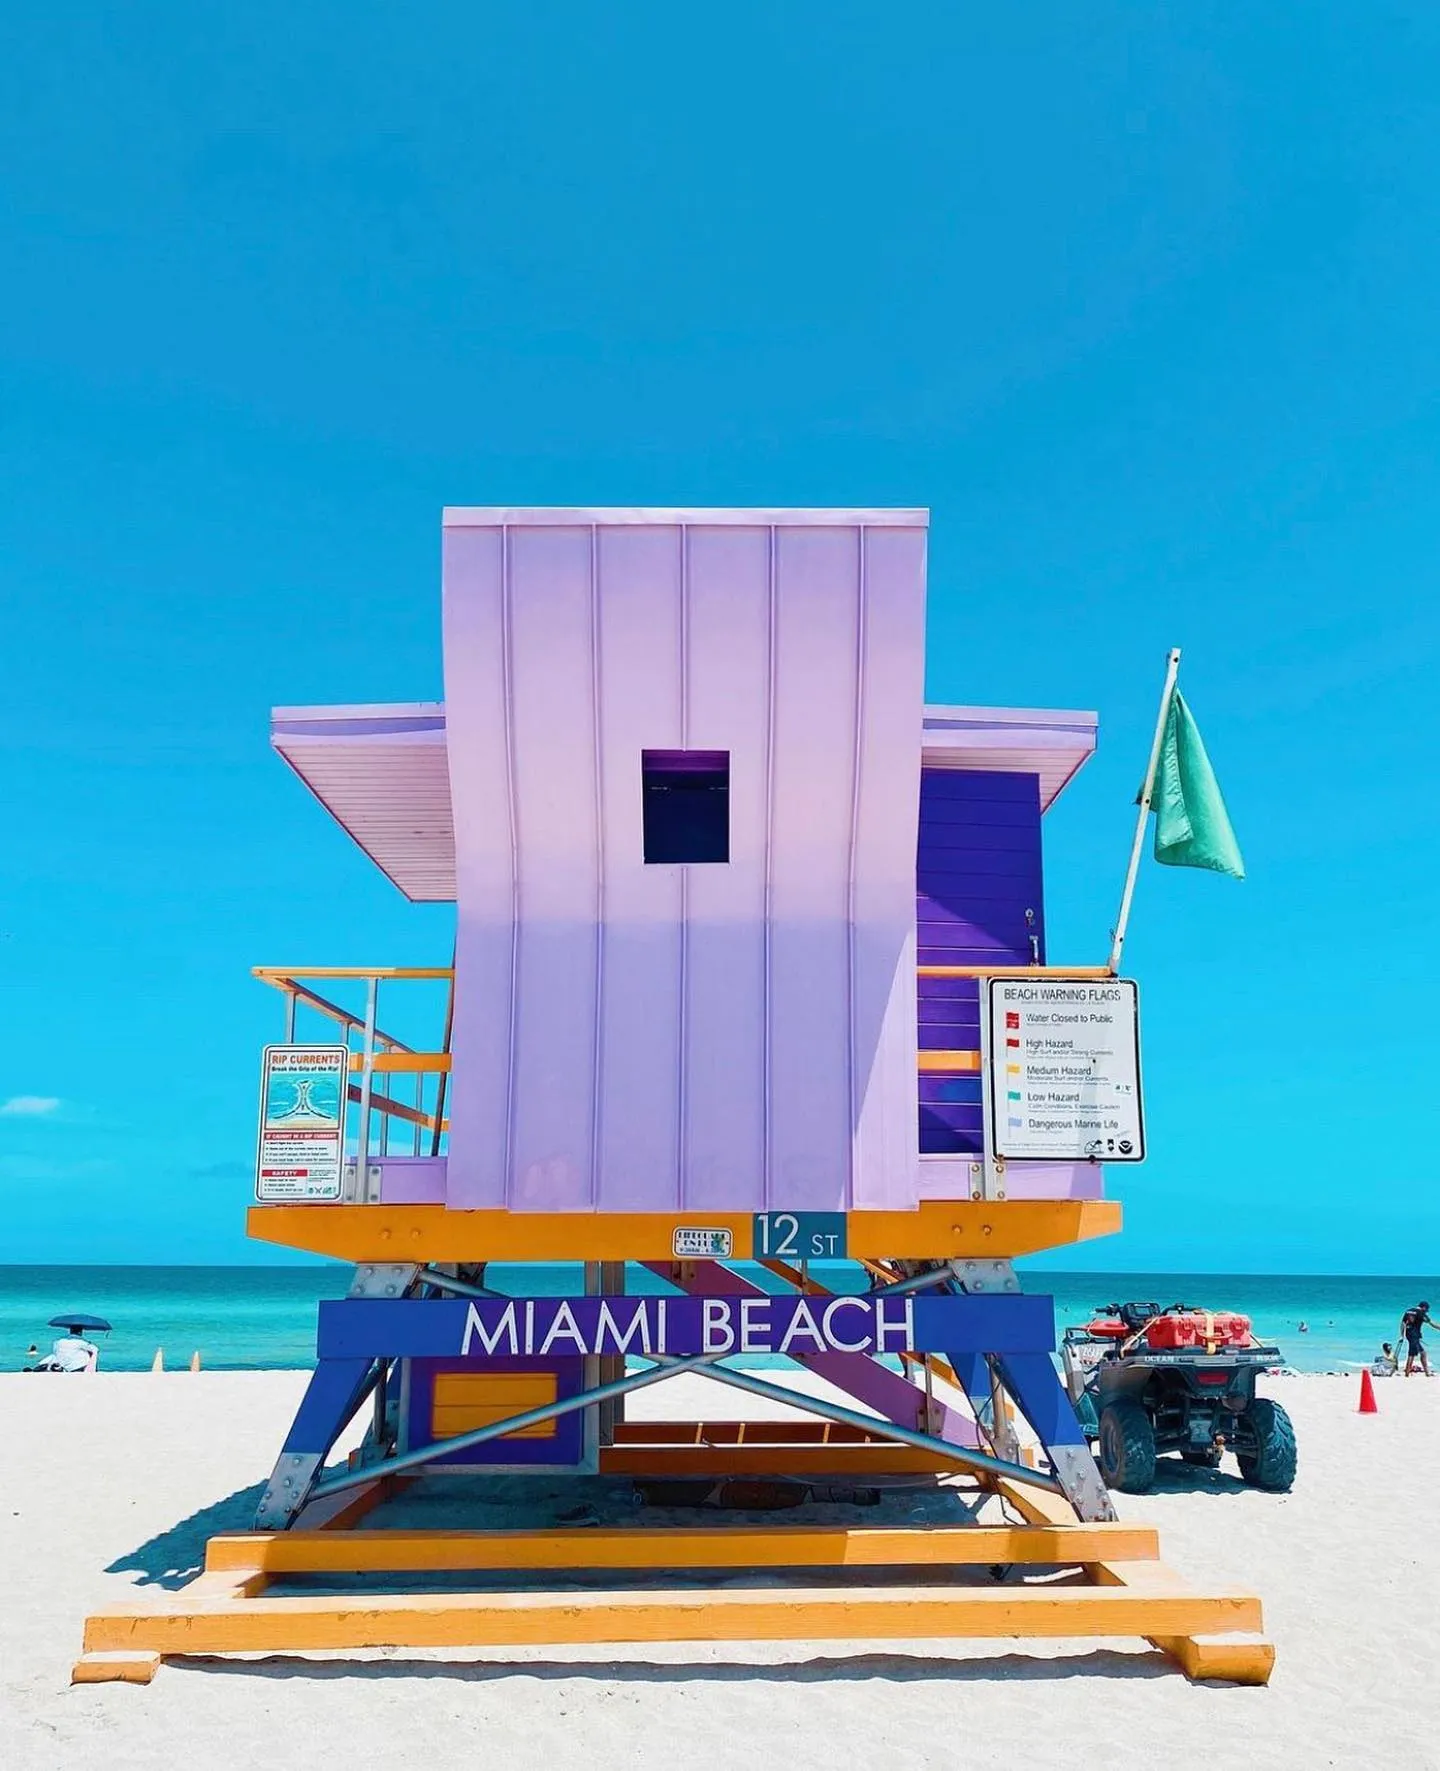 Miami - Our now iconic lifeguard stands originated in the early 1990s as part of the reconstruction after Hurricane